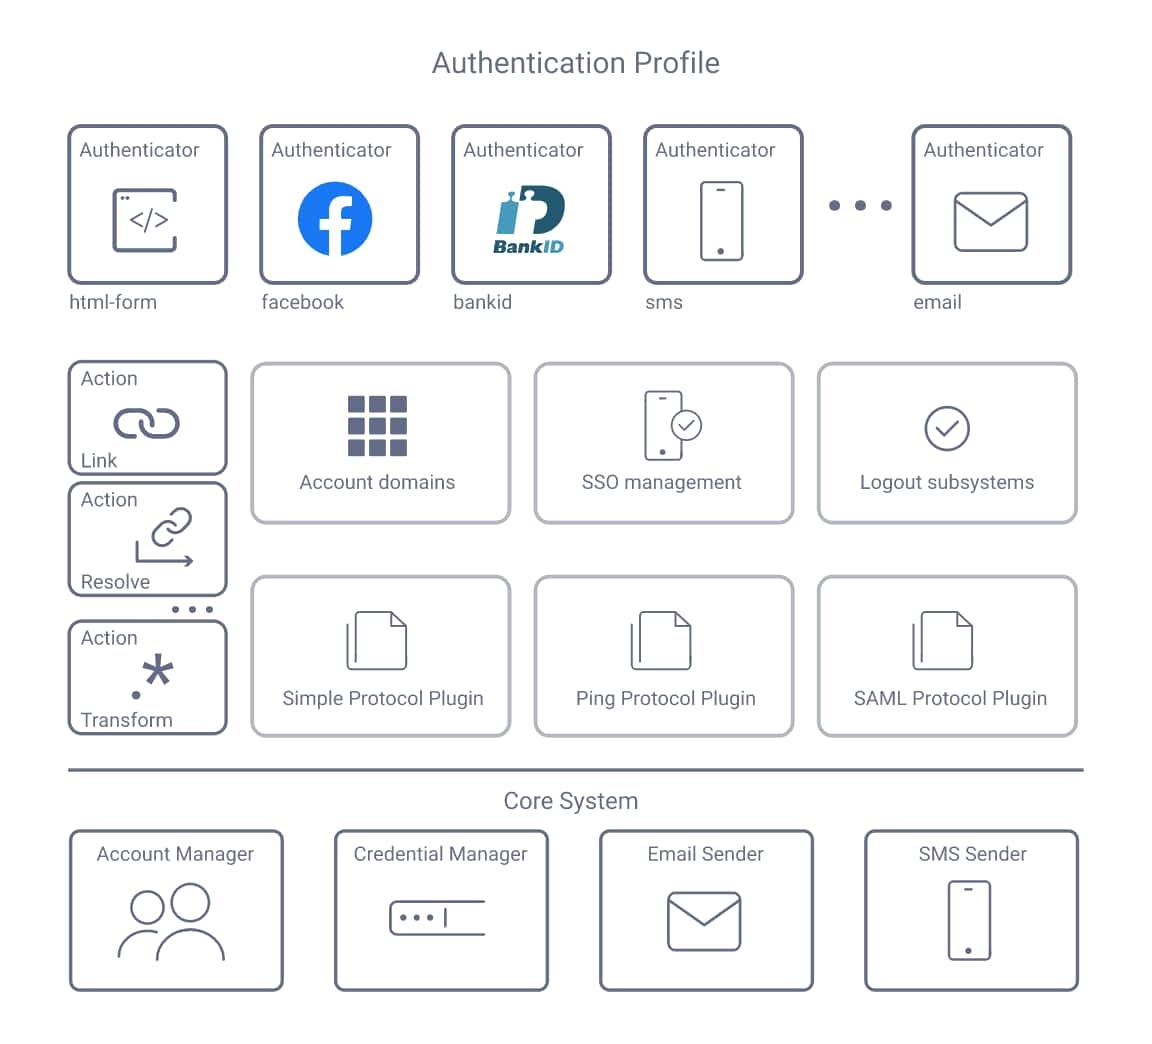 Overview of Authentication Profile components in Curity Identity Server